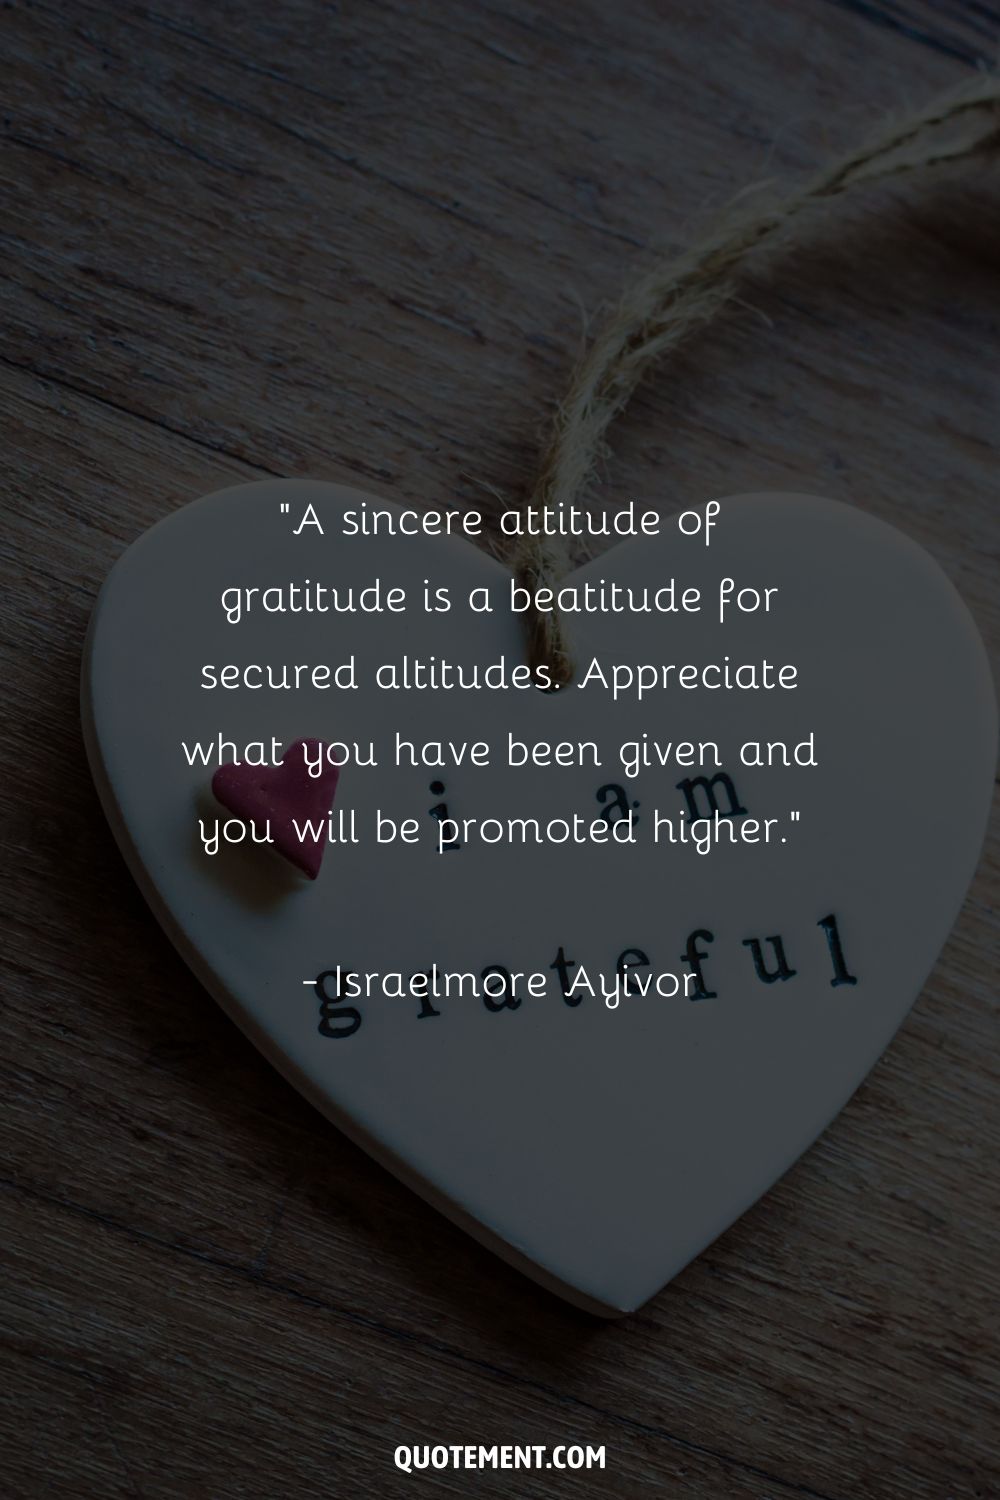 A sincere attitude of gratitude is a beatitude for secured altitudes